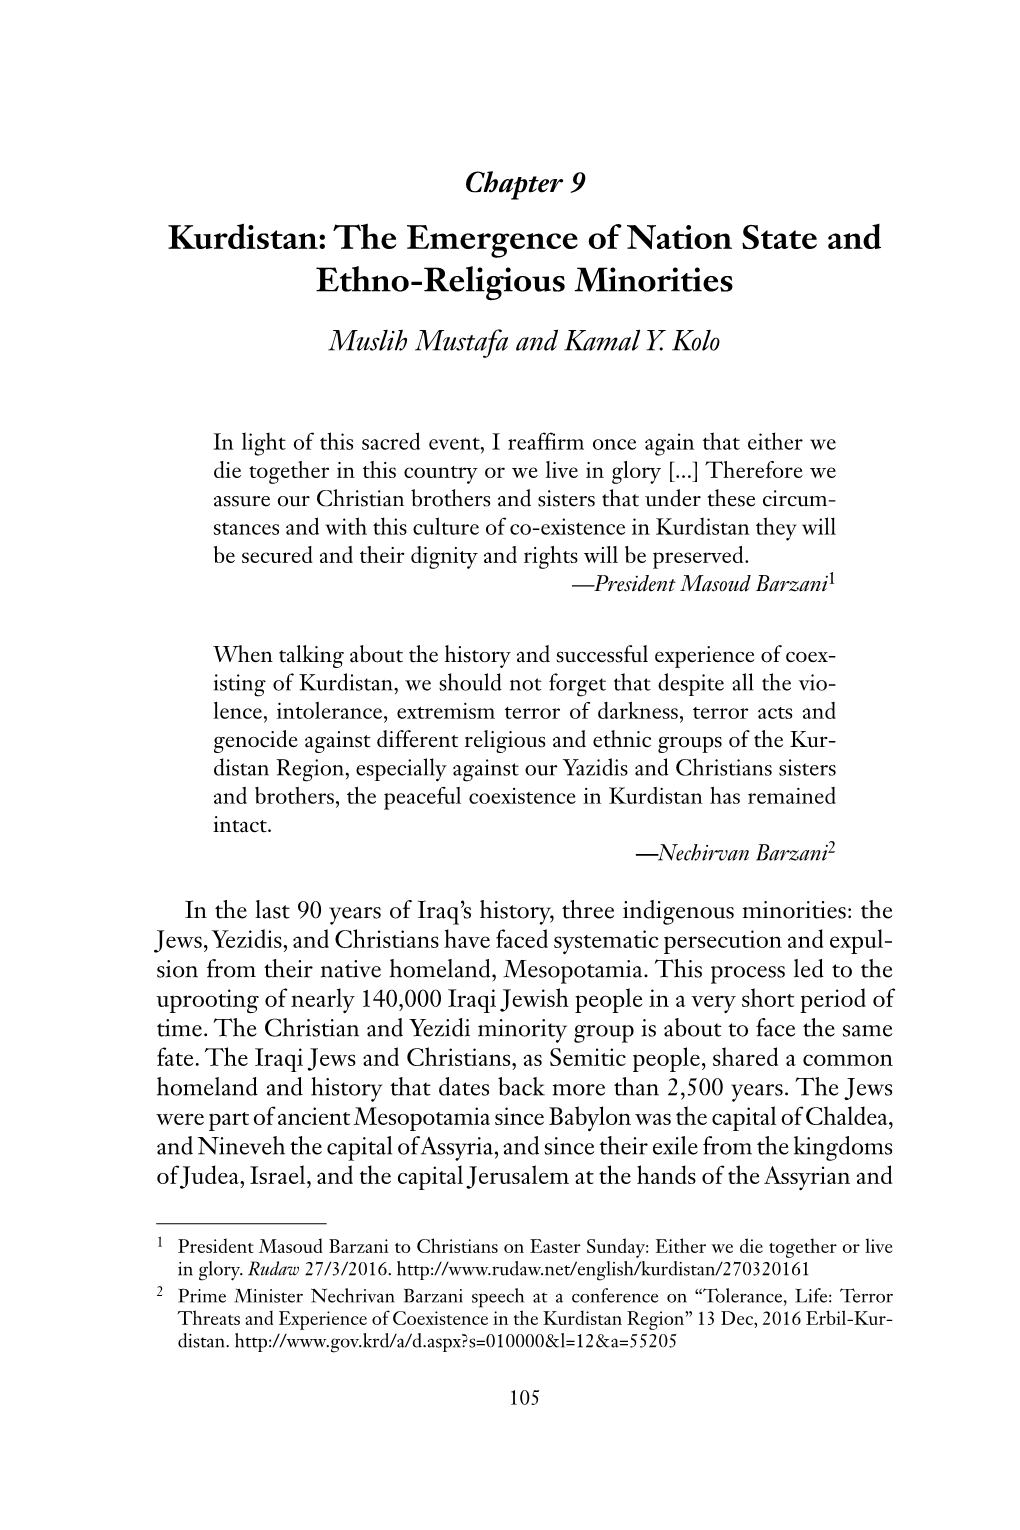 Ctrine of Obscurity Towards Ethno-Religious Minorities Is Not Limited to a Certain Time Frame Or Political Circumstances in Ancient Or